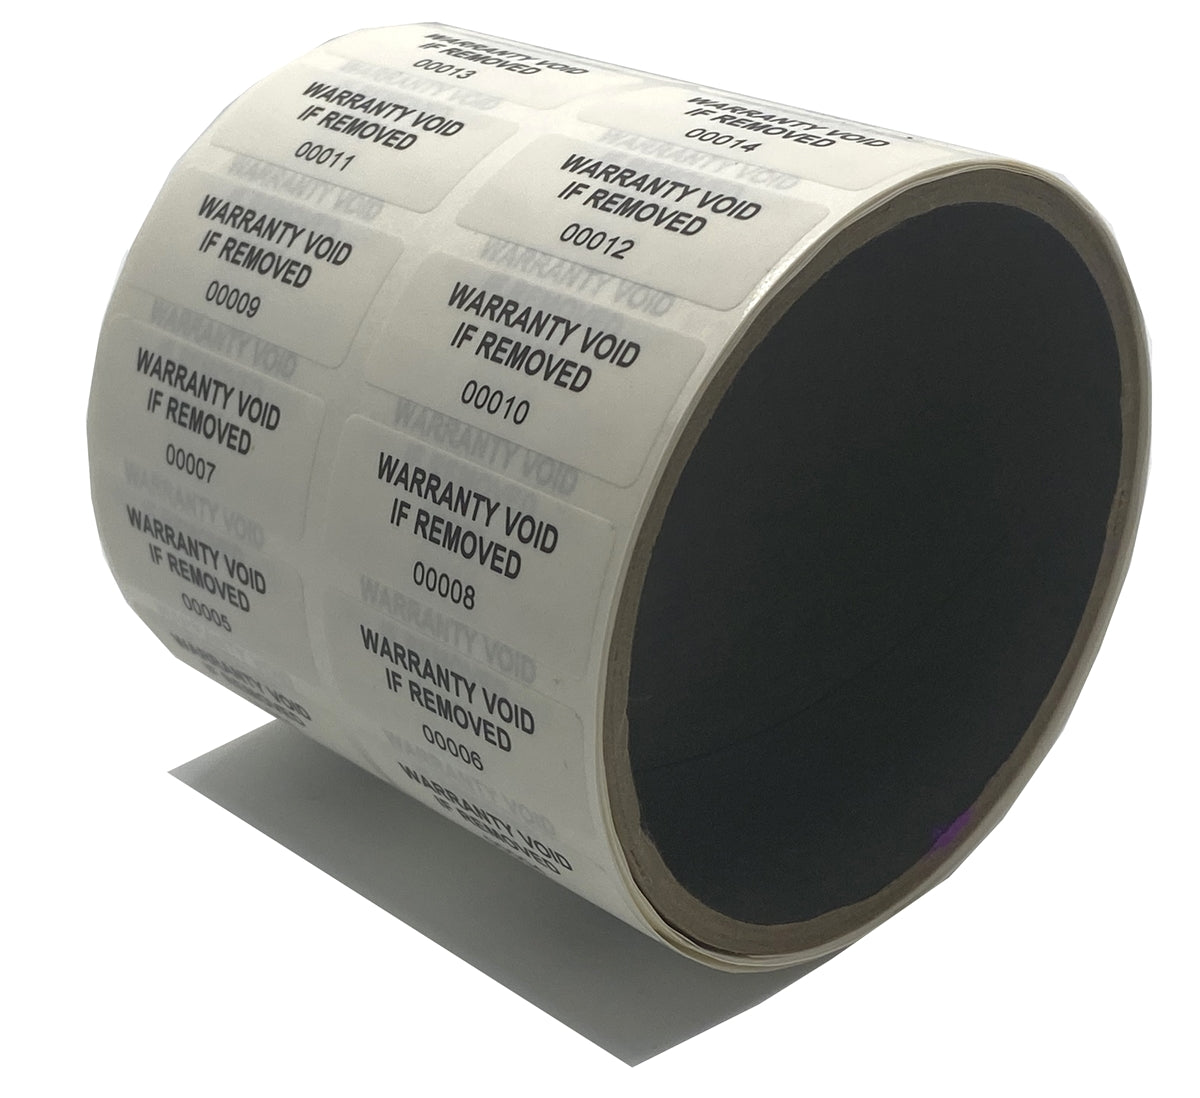 5,000 Tamper Evident White Non Residue Security Labels TamperGuard® Seal Sticker, Rectangle 1.5" x 0.6" (38mm x 15mm). Printed: Warranty Void if Removed + Serialized